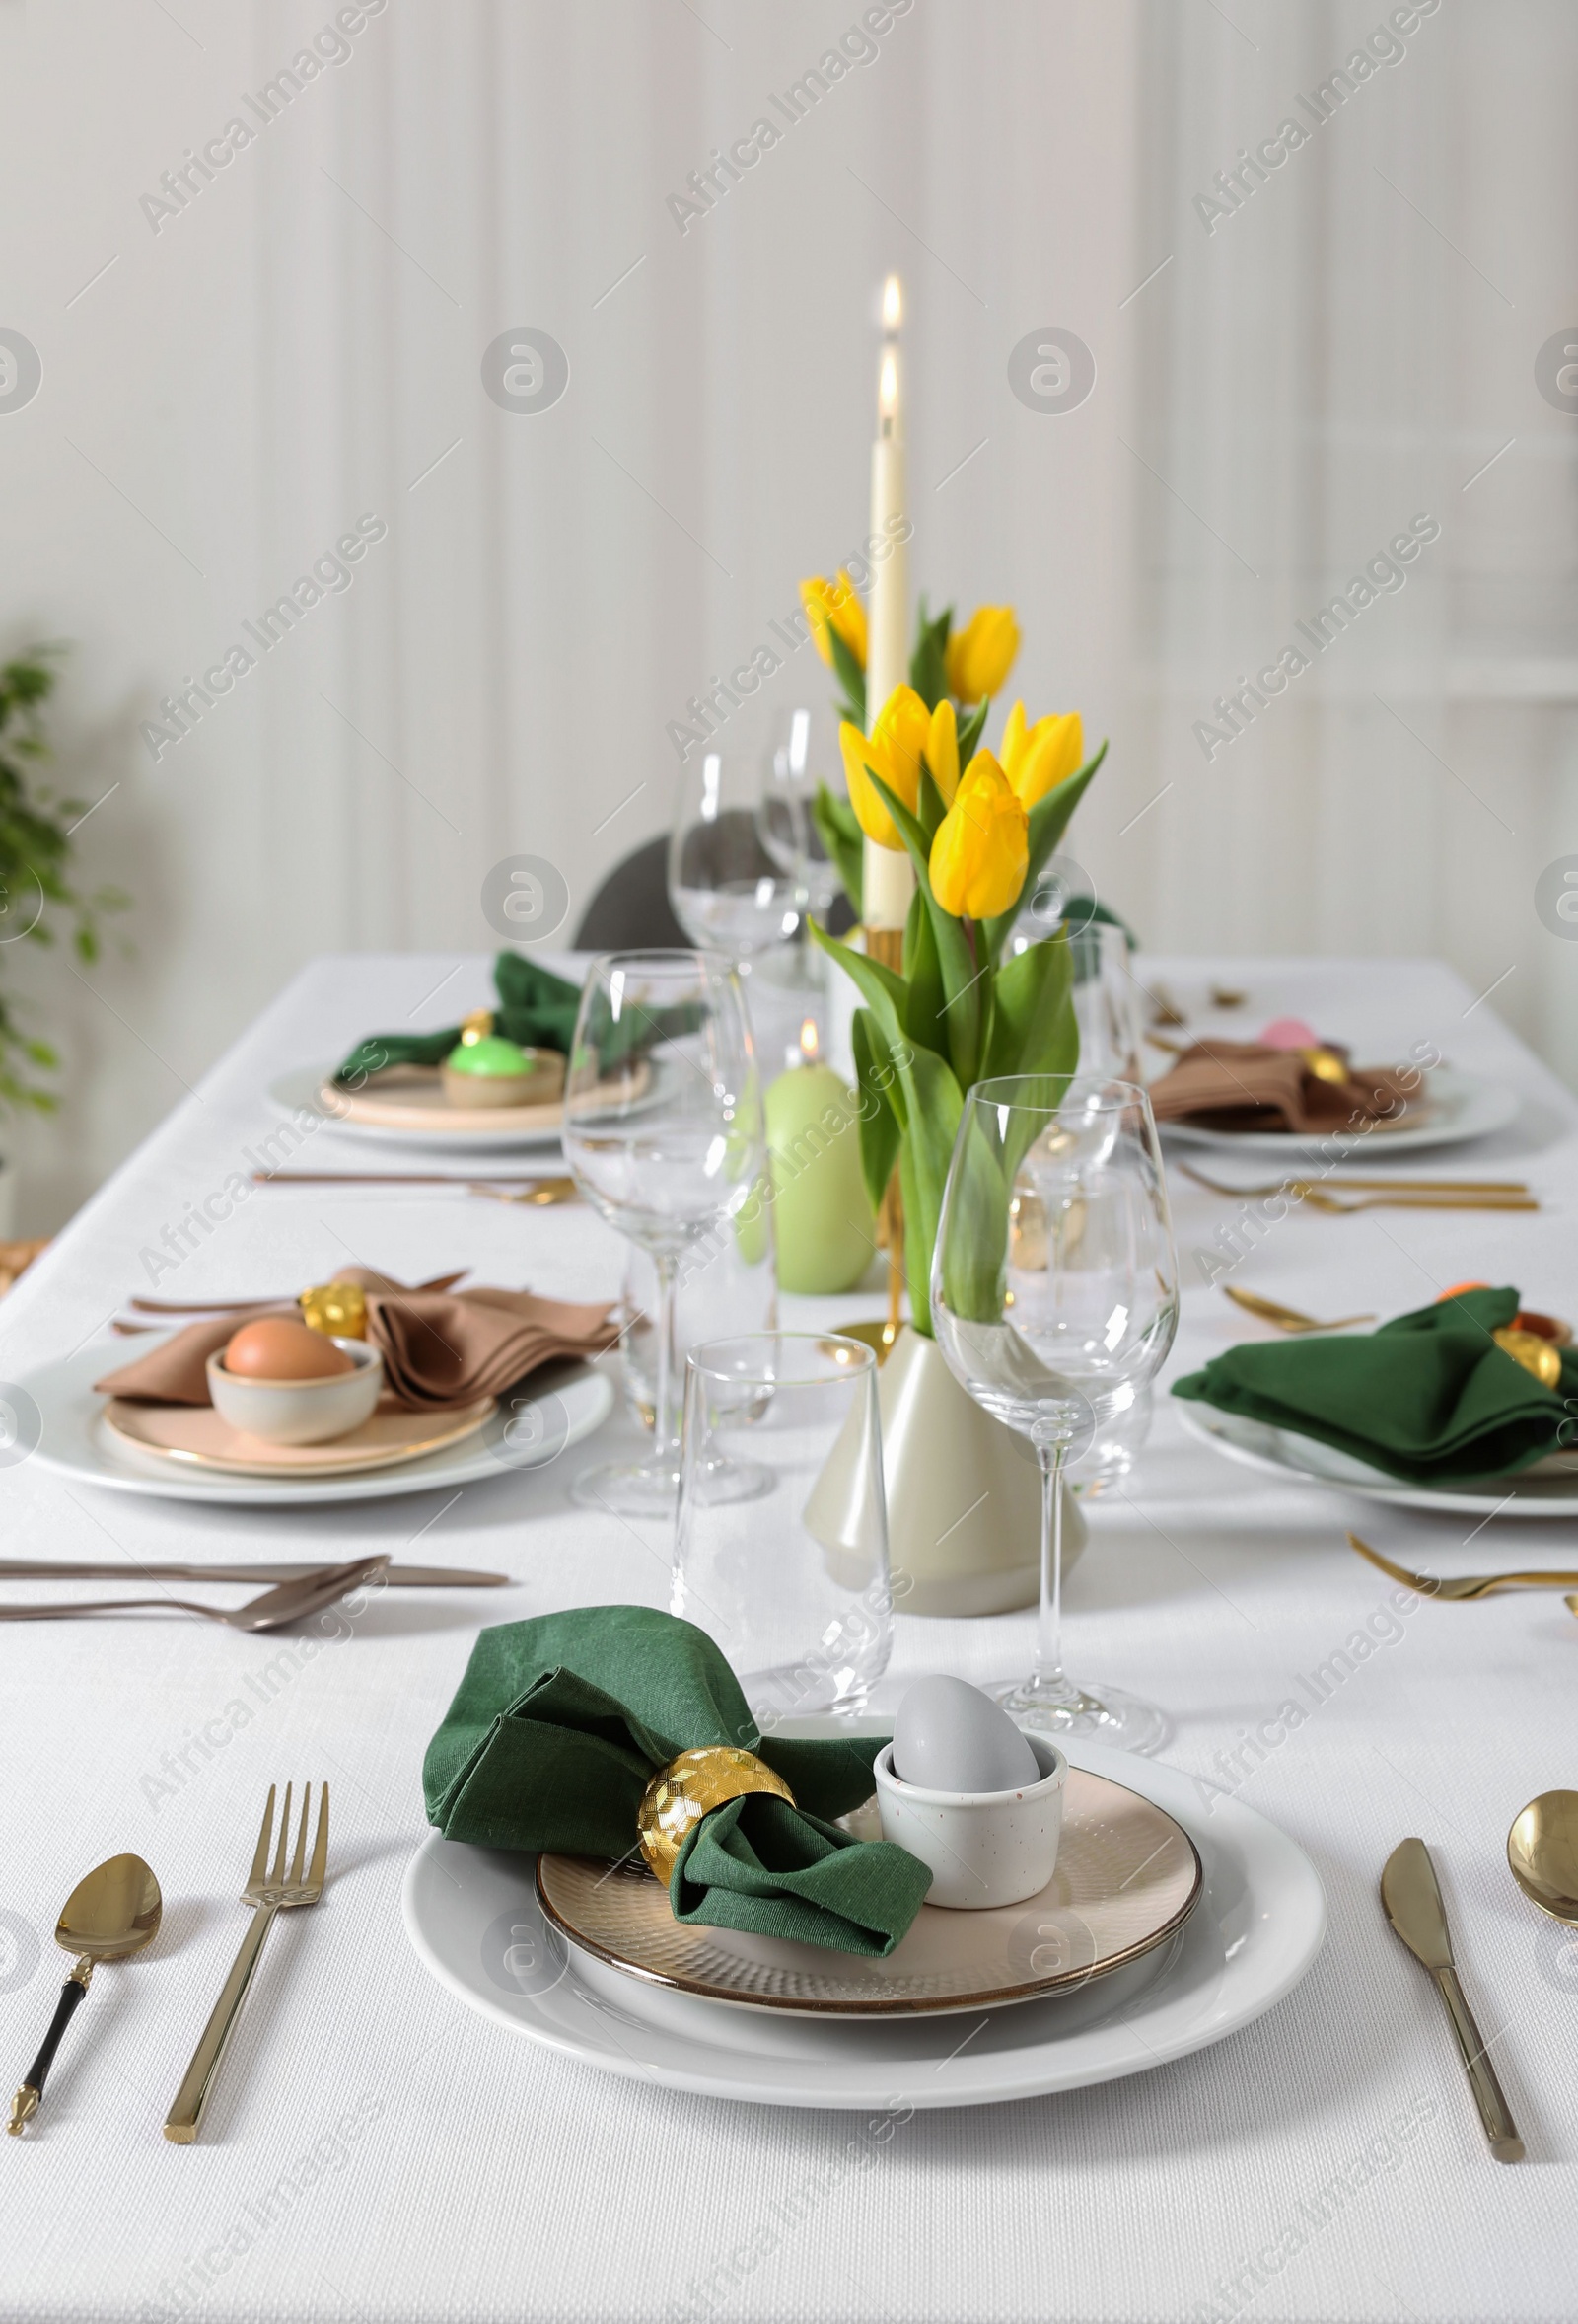 Photo of Festive Easter table setting with painted eggs, burning candles and yellow tulips indoors